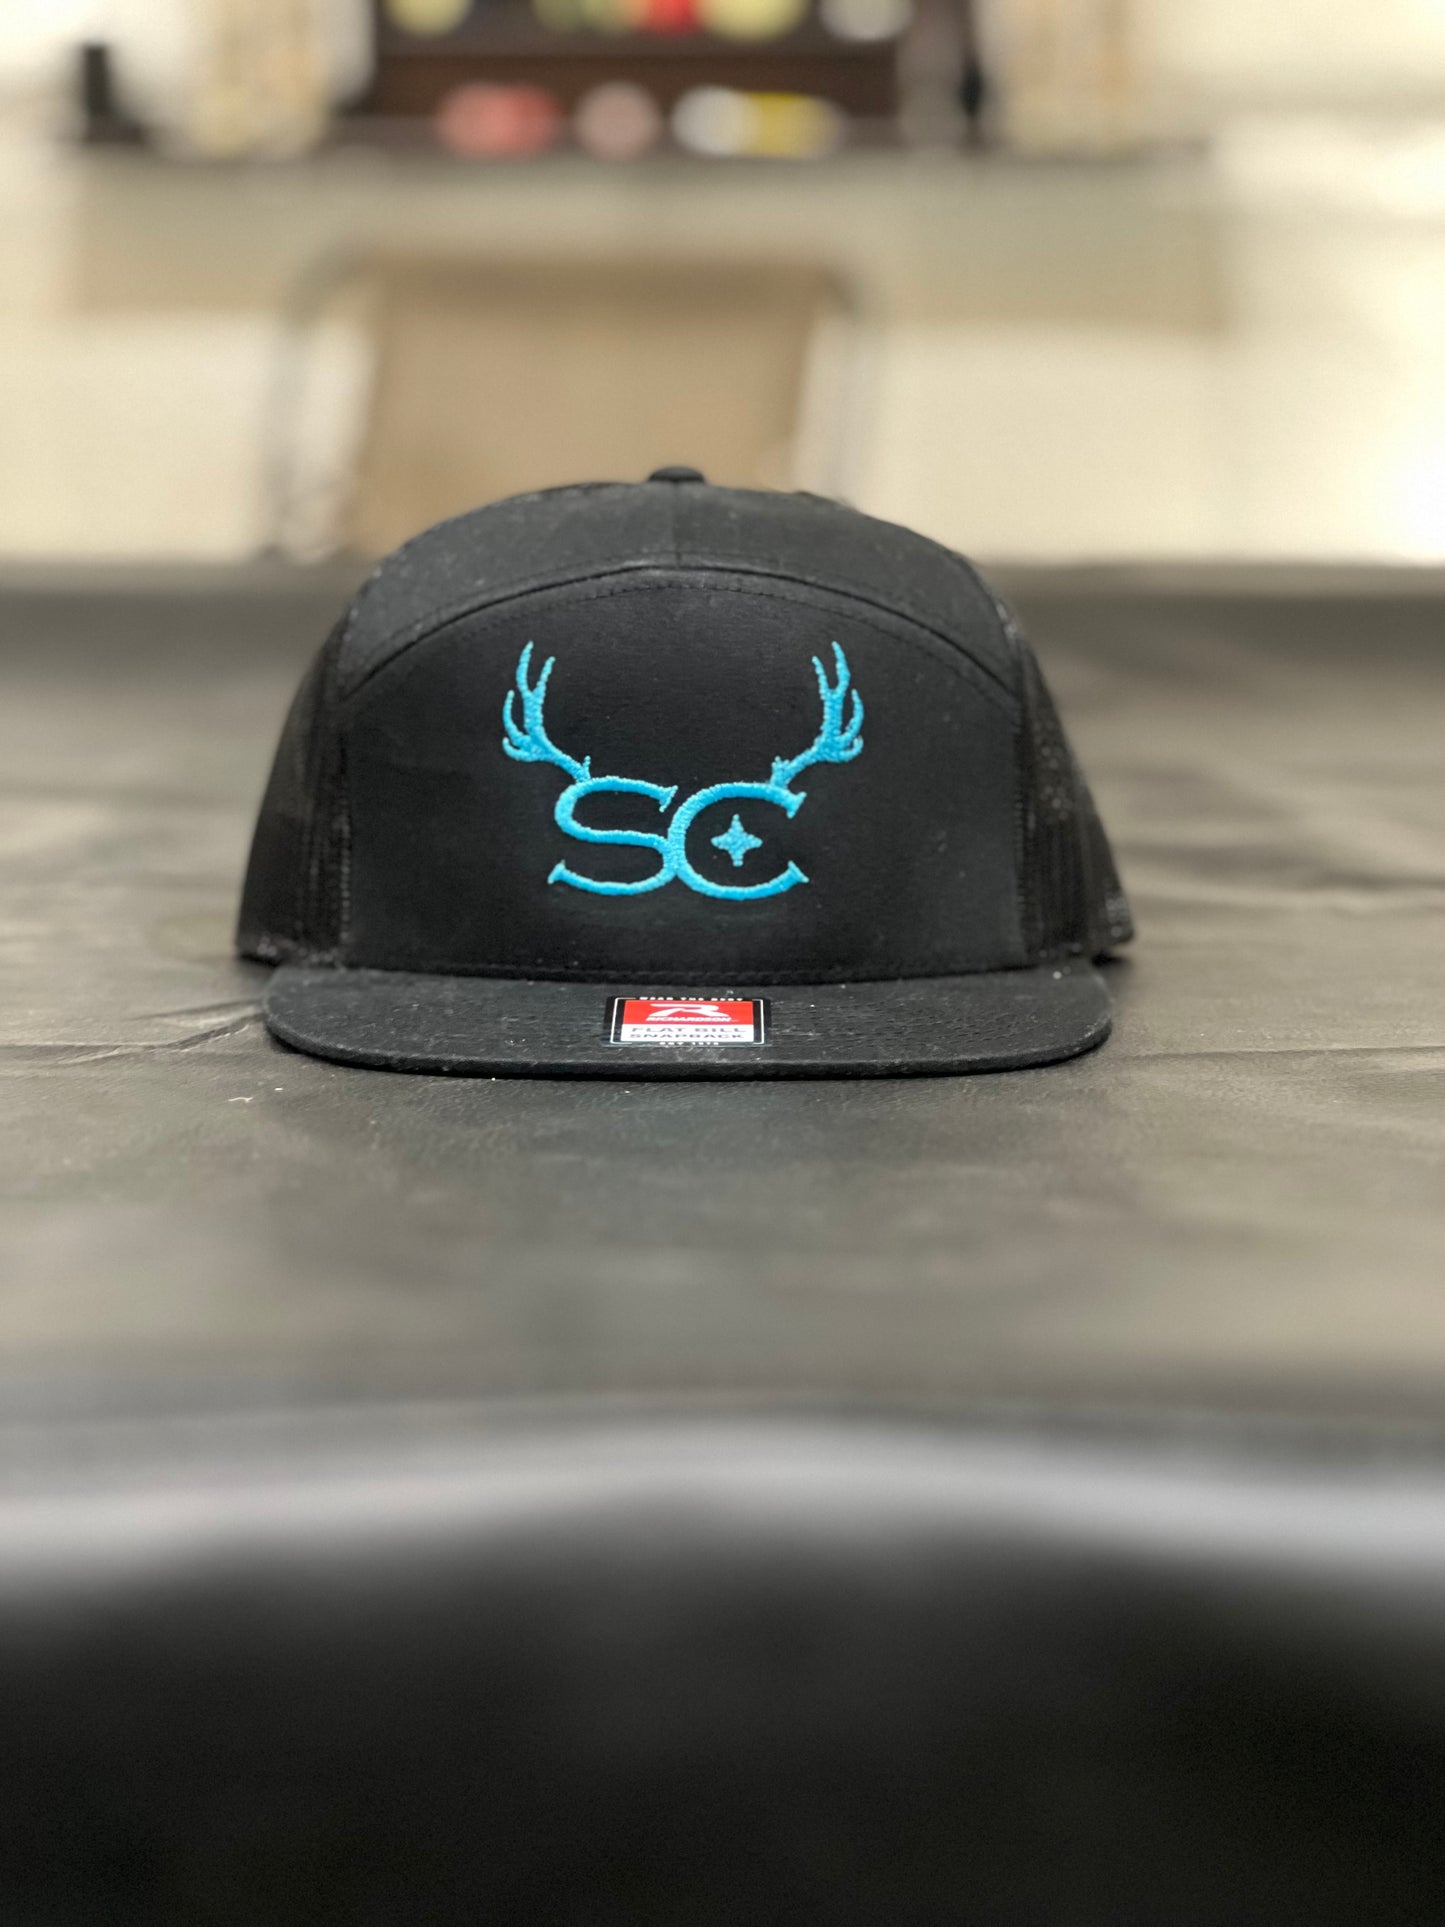 Southern Stag - Turquoise